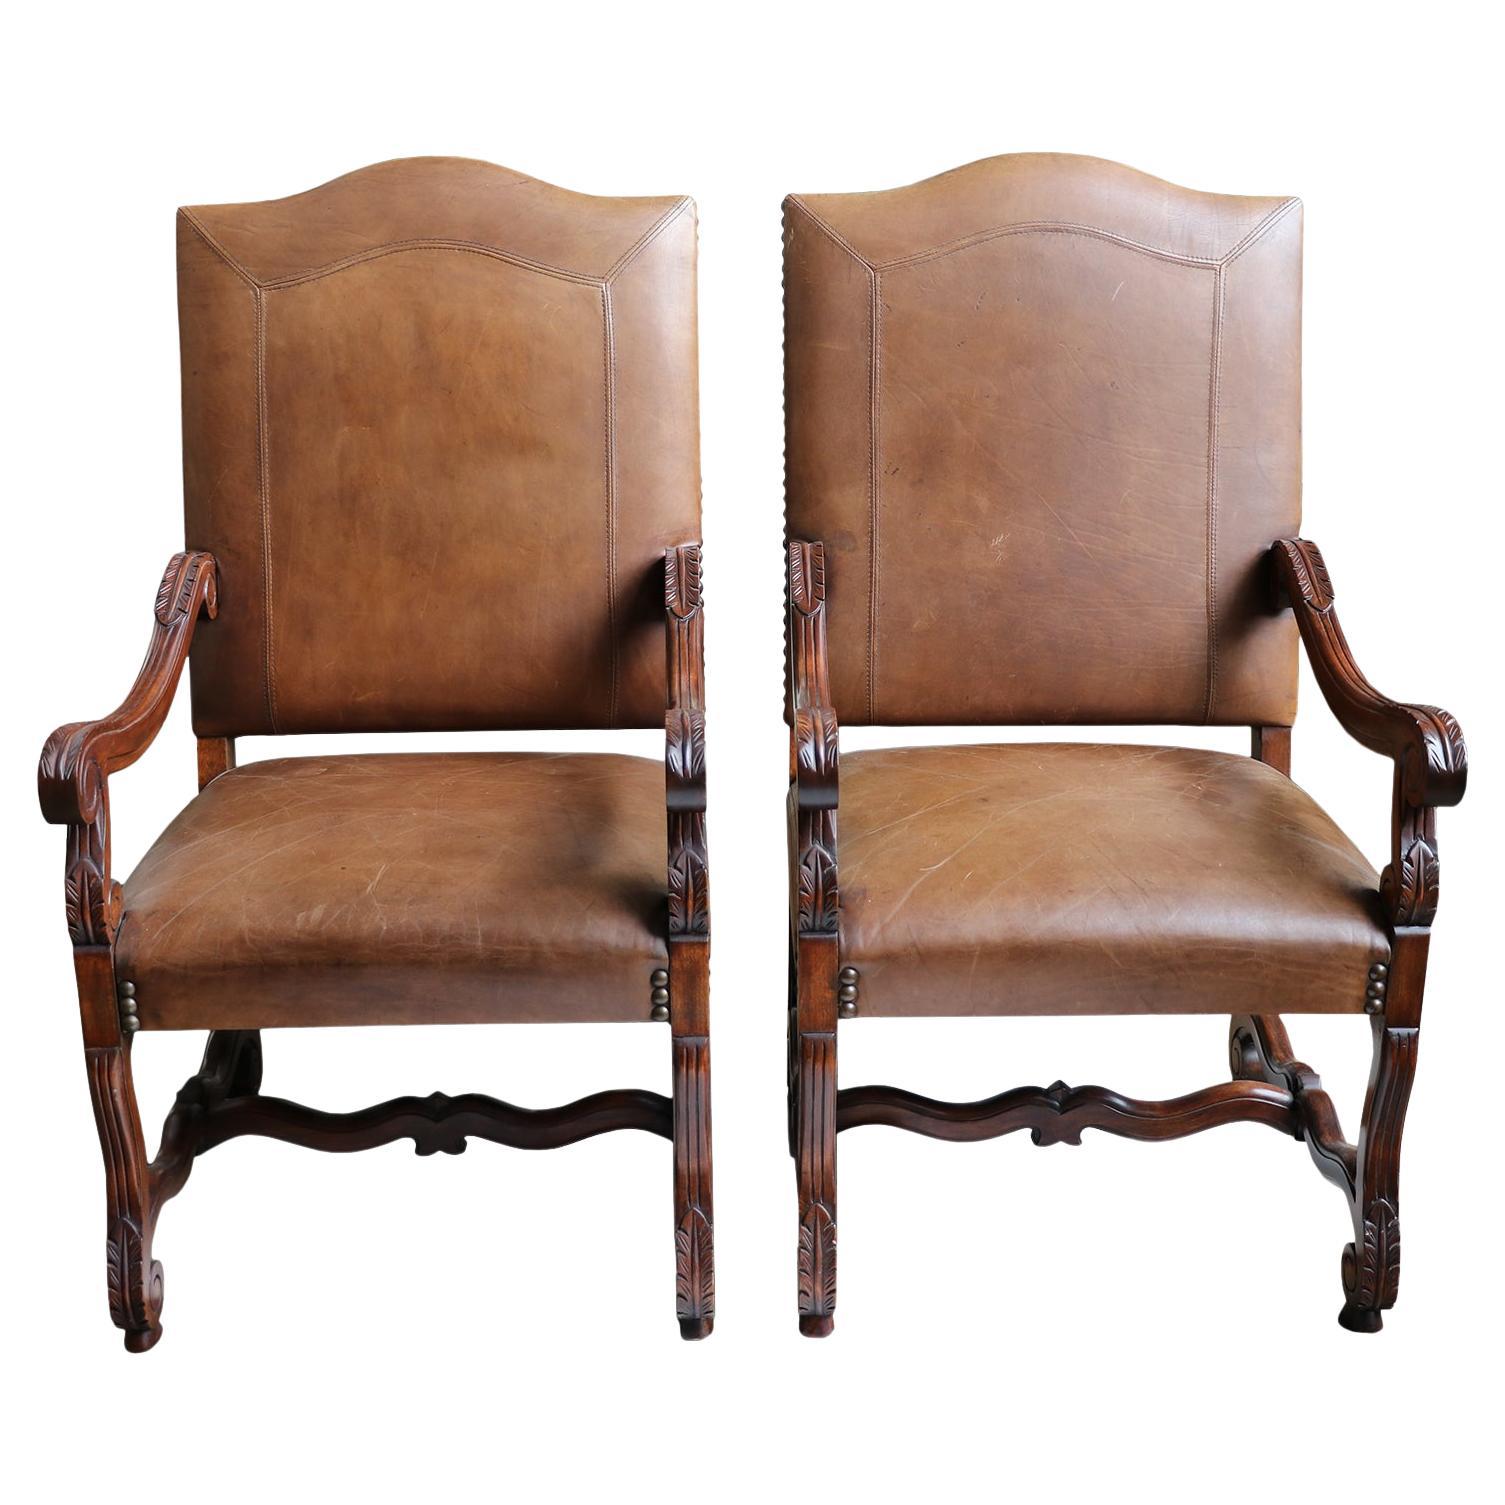 Leather Arm Chairs With Nail Head and Carving Details - a Pair